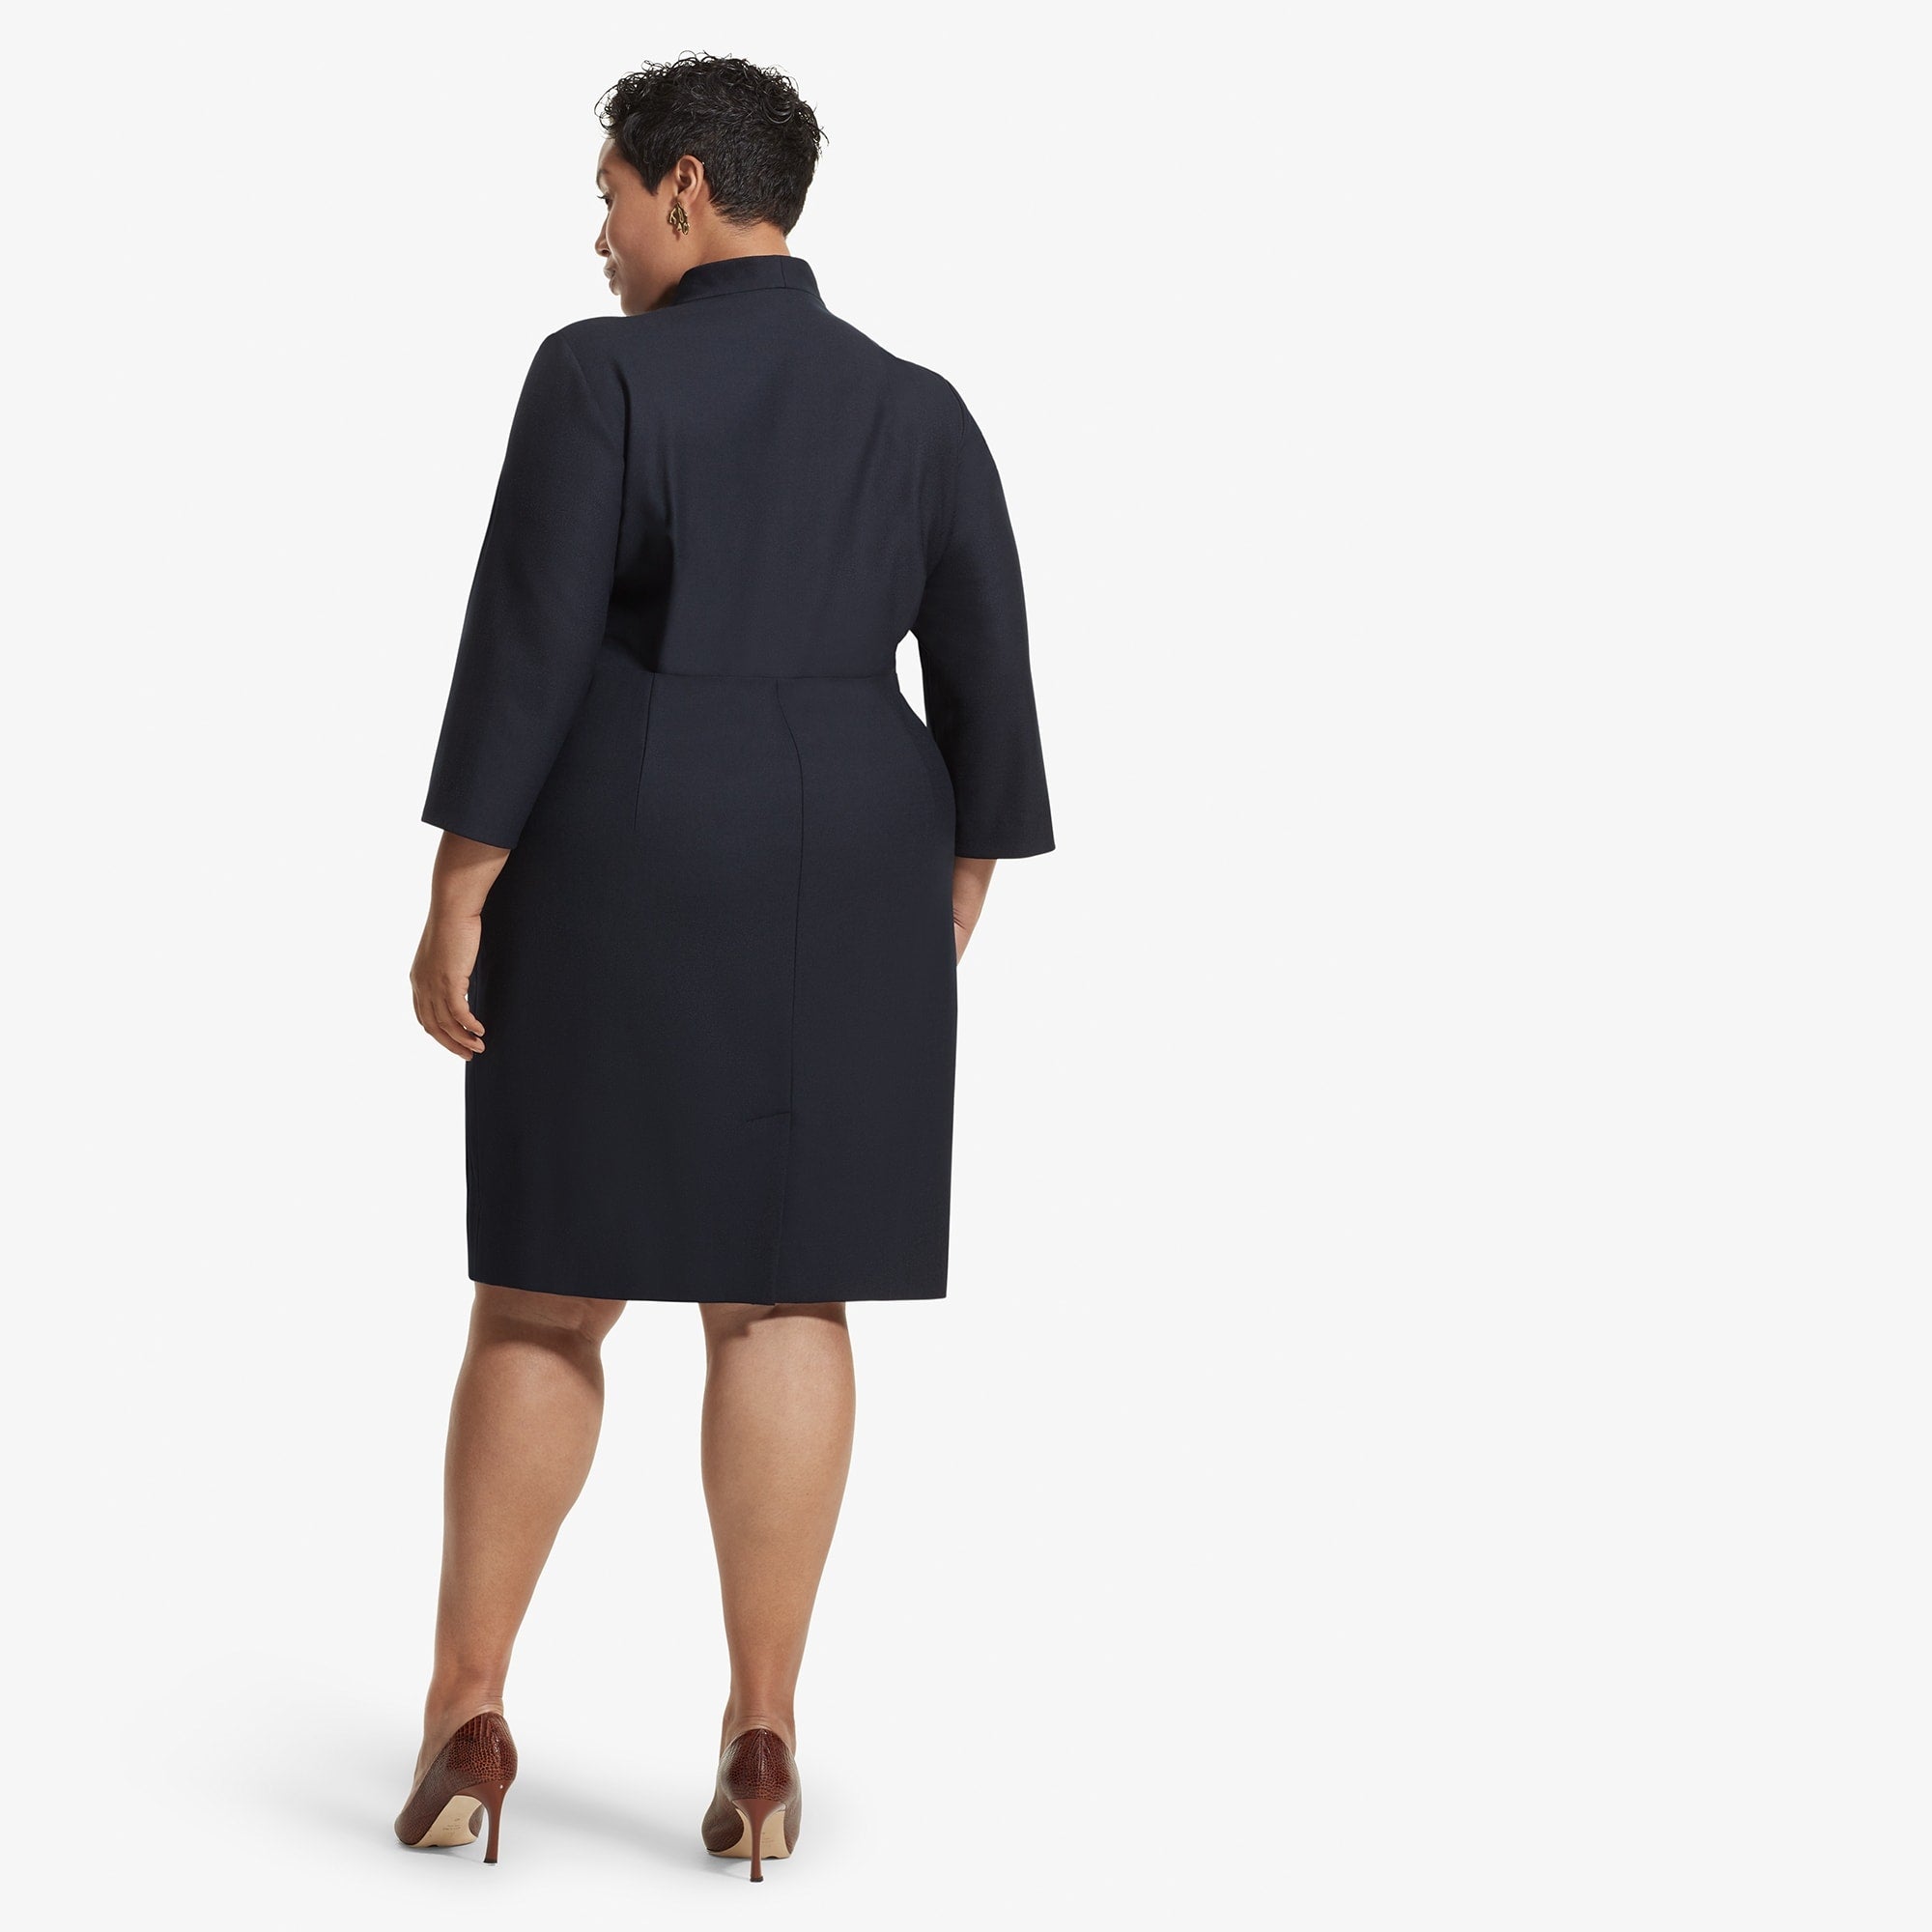 Back image of a woman standing wearing the Niko dress sharkskin in Ink